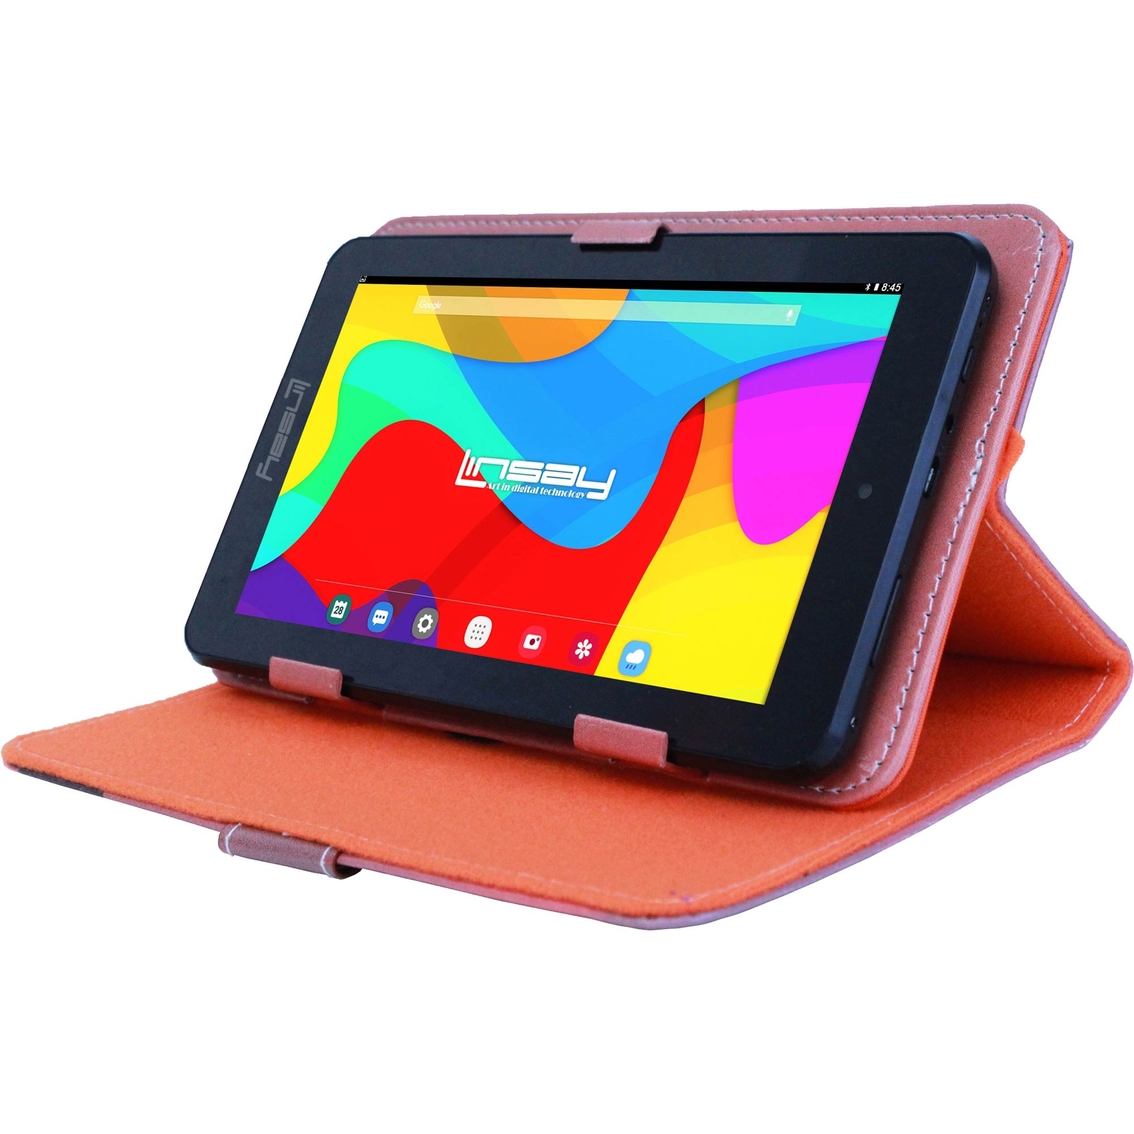 Linsay 7 in. 2GB RAM 32GB Tablet with Case, Holder and Pen - Image 2 of 3